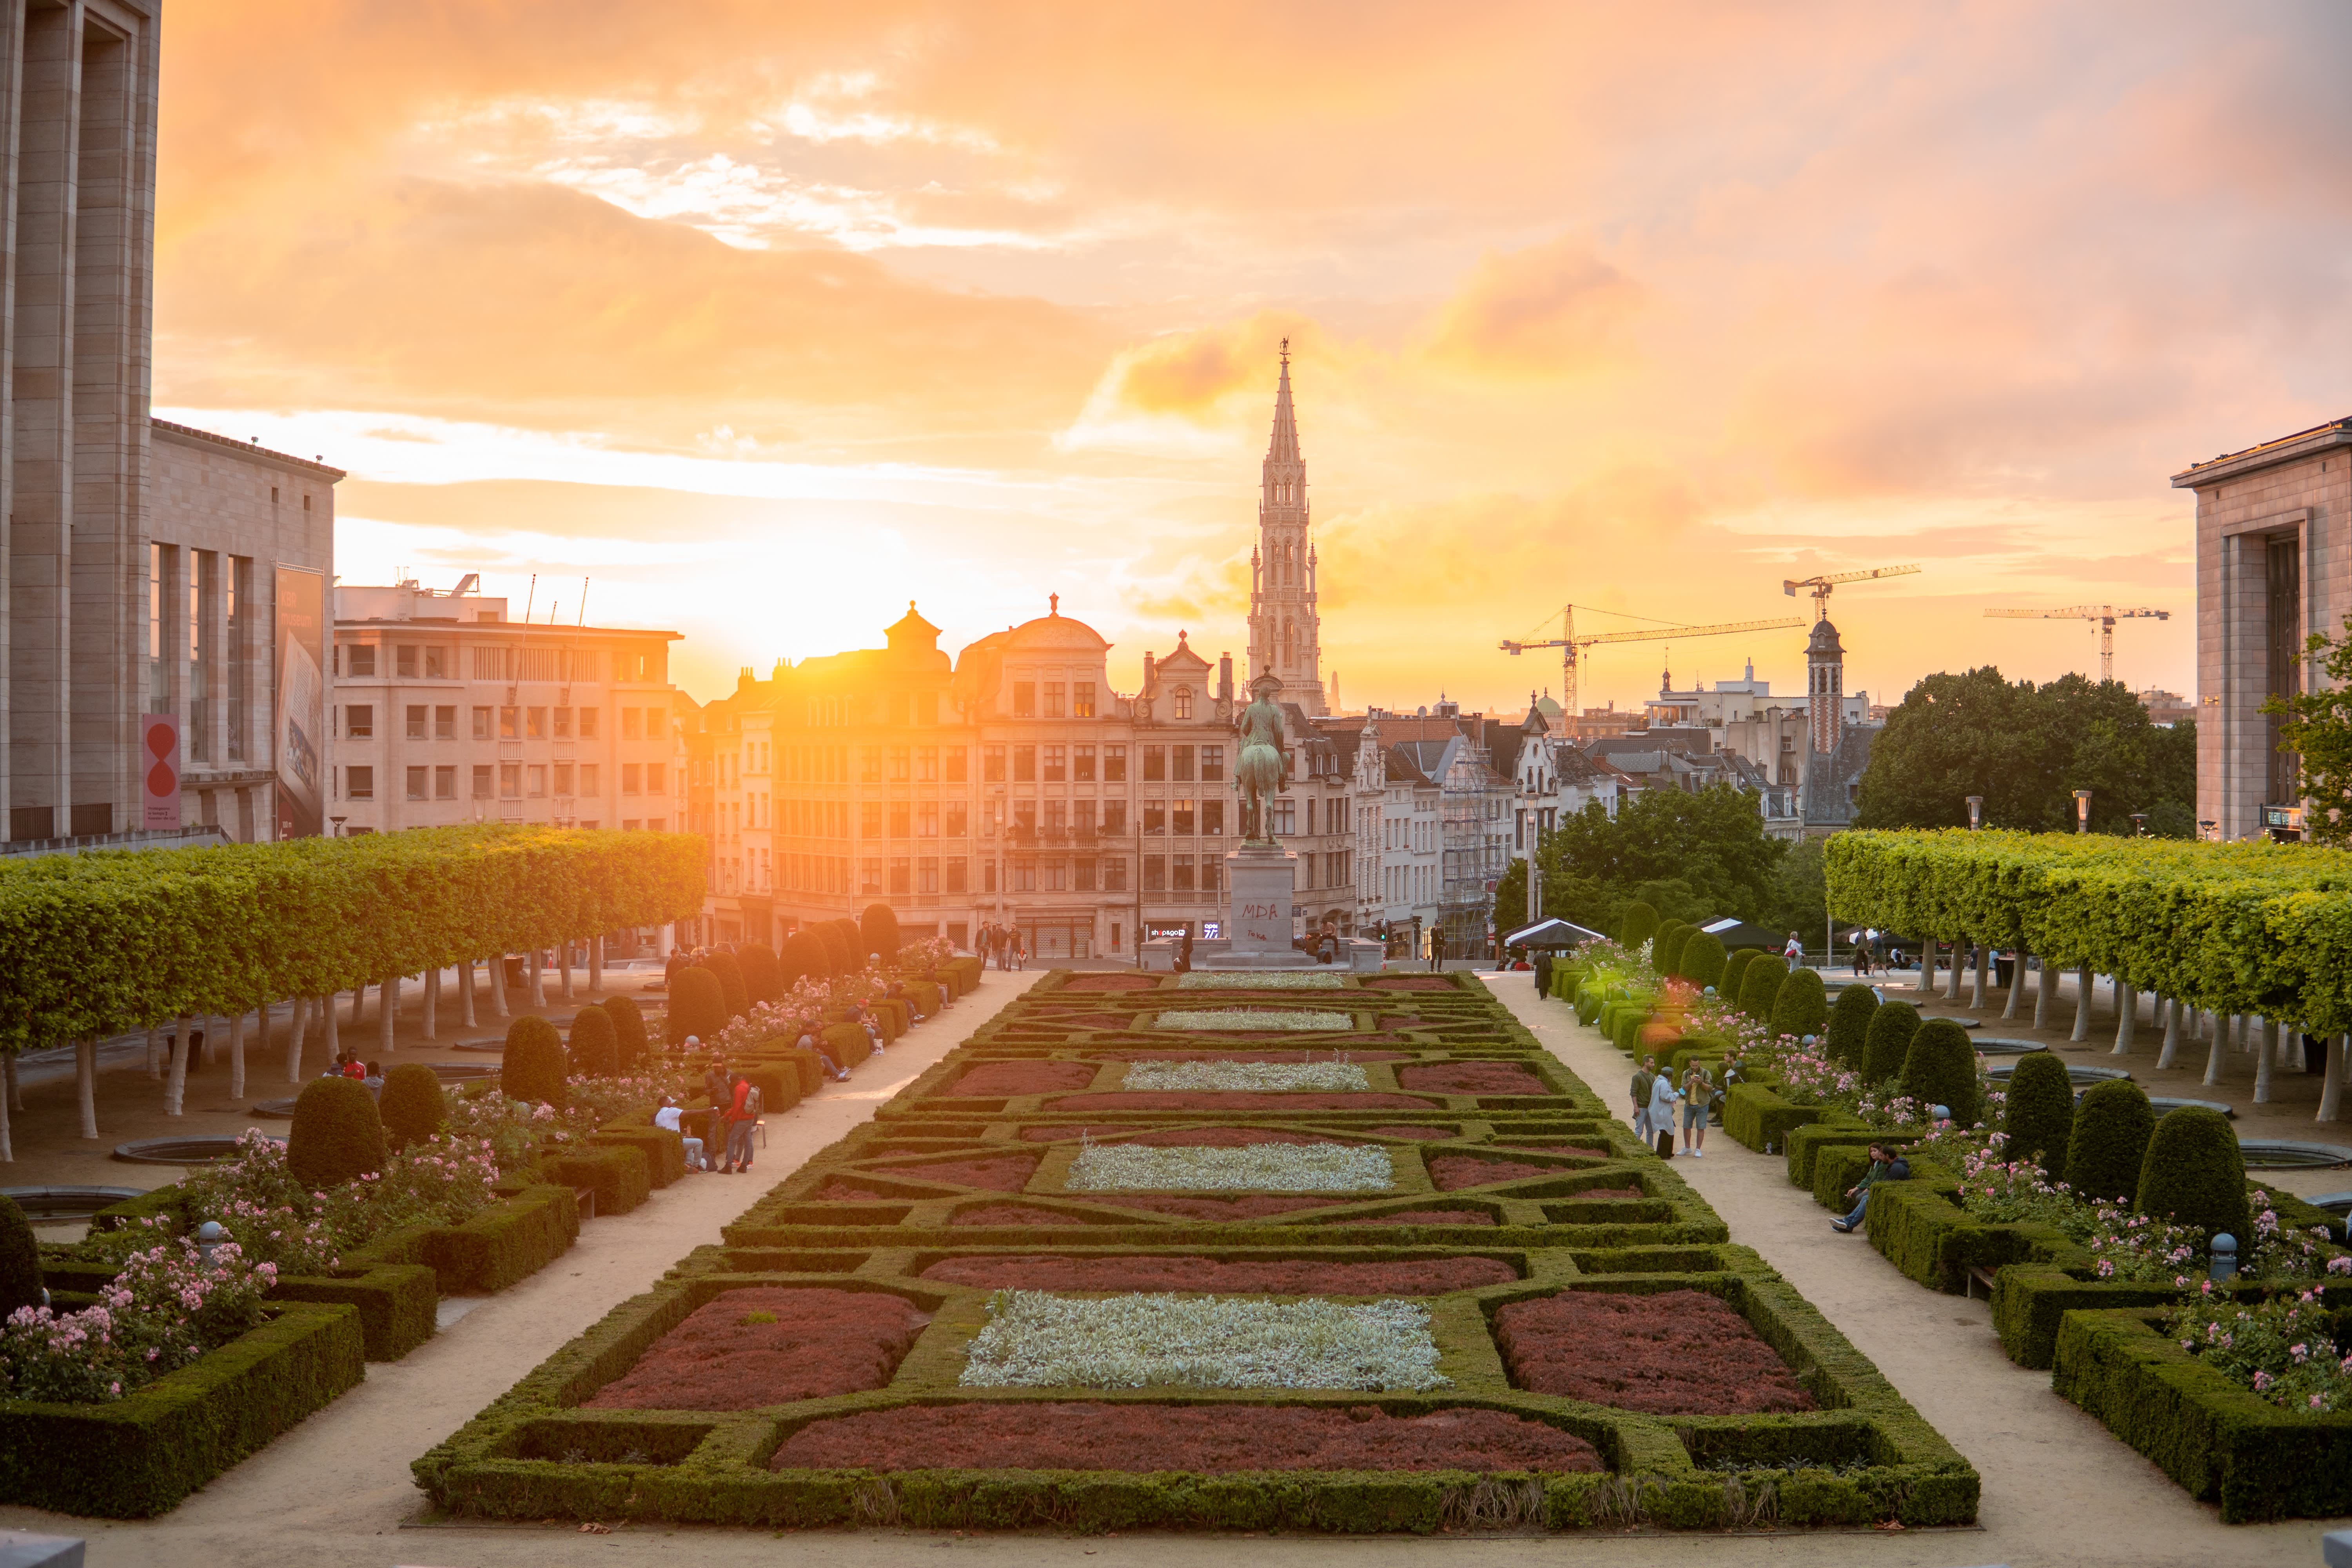 Brussels during sunset